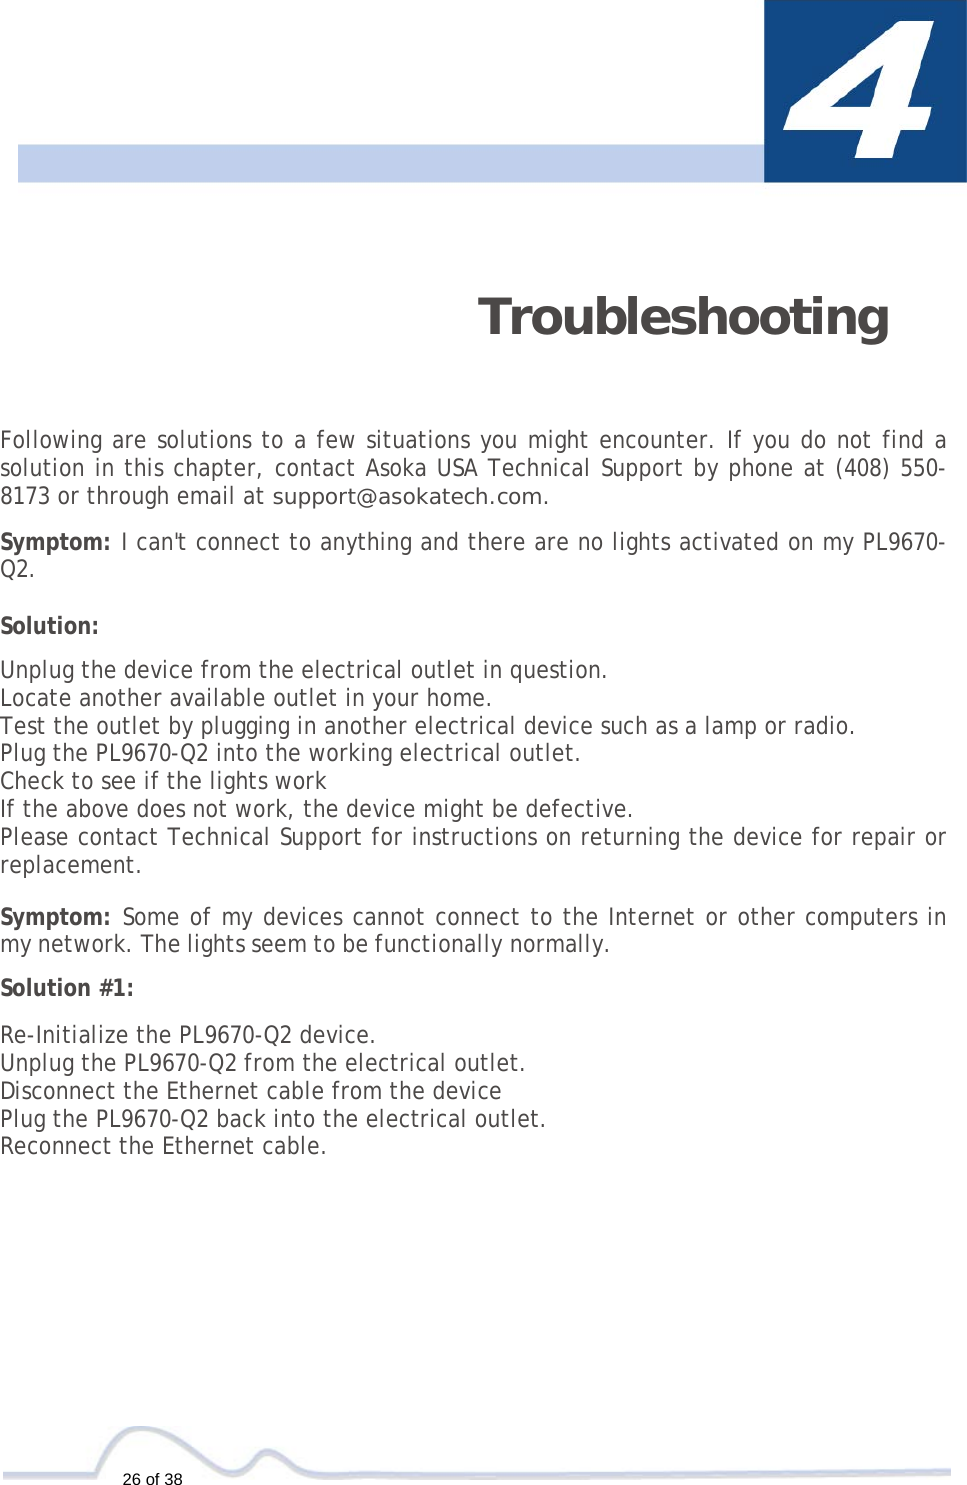  26 of 38   Troubleshooting   Following are solutions to a few situations you might encounter. If you do not find a solution in this chapter, contact Asoka USA Technical Support by phone at (408) 550-8173 or through email at support@asokatech.com.  Symptom: I can&apos;t connect to anything and there are no lights activated on my PL9670-Q2.  Solution:  Unplug the device from the electrical outlet in question. Locate another available outlet in your home. Test the outlet by plugging in another electrical device such as a lamp or radio. Plug the PL9670-Q2 into the working electrical outlet. Check to see if the lights work If the above does not work, the device might be defective. Please contact Technical Support for instructions on returning the device for repair or replacement.  Symptom: Some of my devices cannot connect to the Internet or other computers in my network. The lights seem to be functionally normally.  Solution #1:  Re-Initialize the PL9670-Q2 device. Unplug the PL9670-Q2 from the electrical outlet. Disconnect the Ethernet cable from the device Plug the PL9670-Q2 back into the electrical outlet. Reconnect the Ethernet cable. 